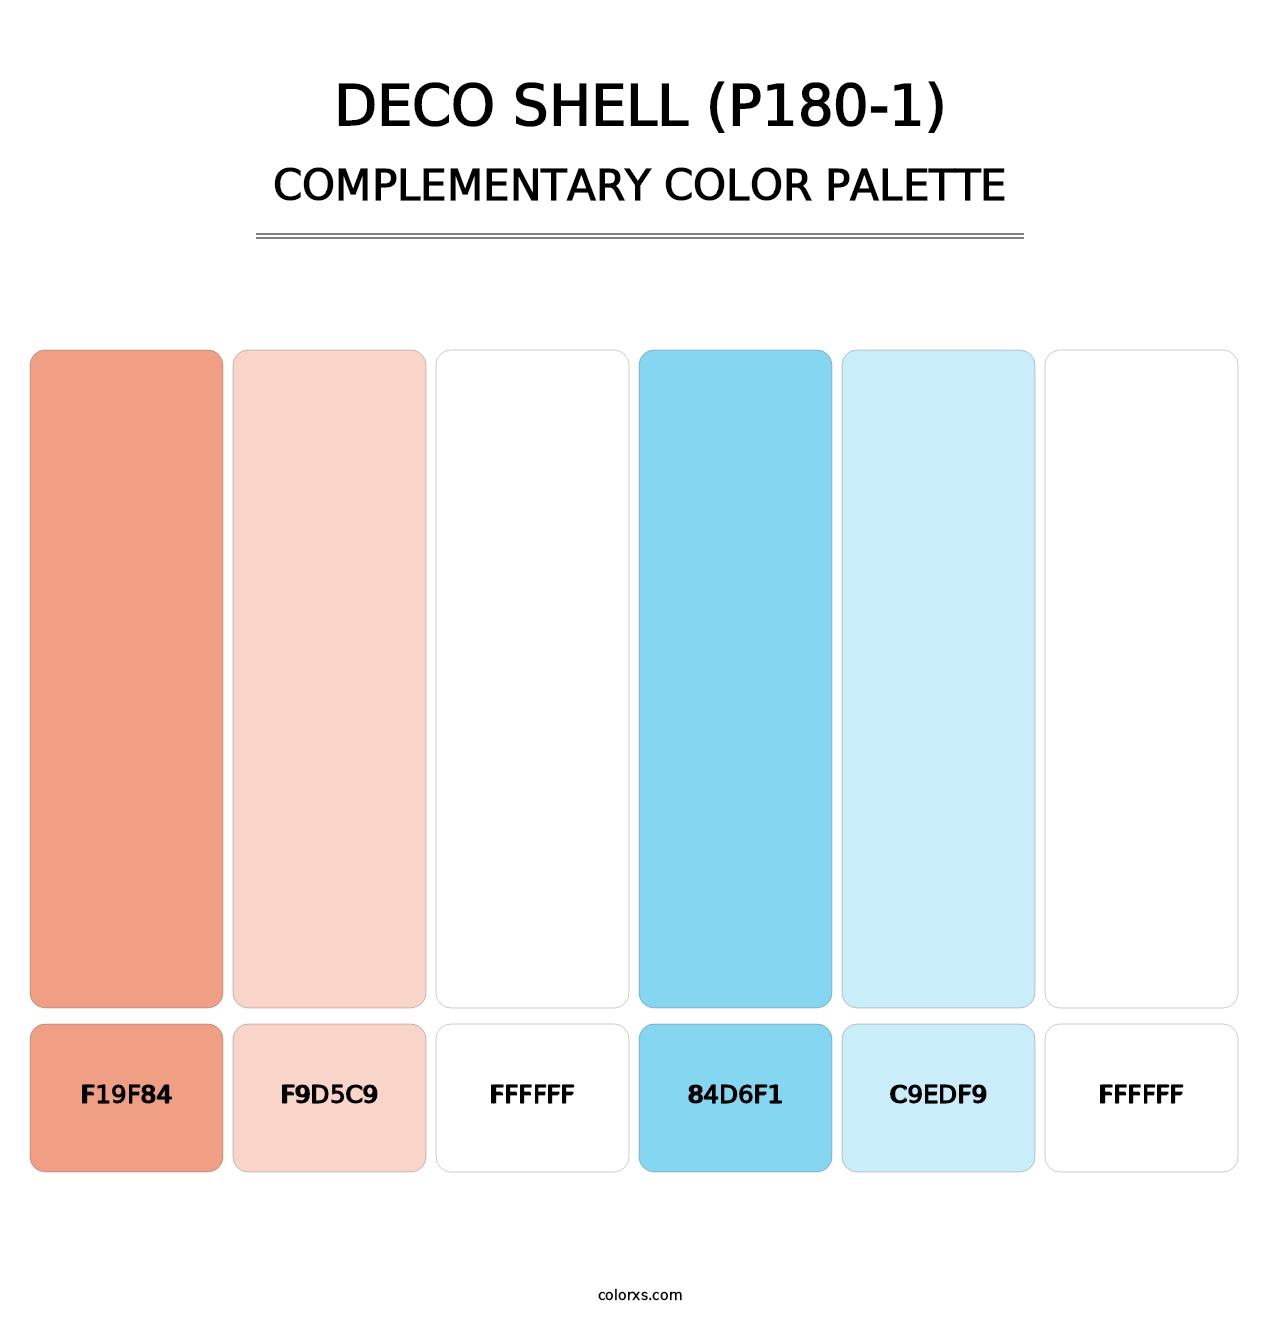 Deco Shell (P180-1) - Complementary Color Palette